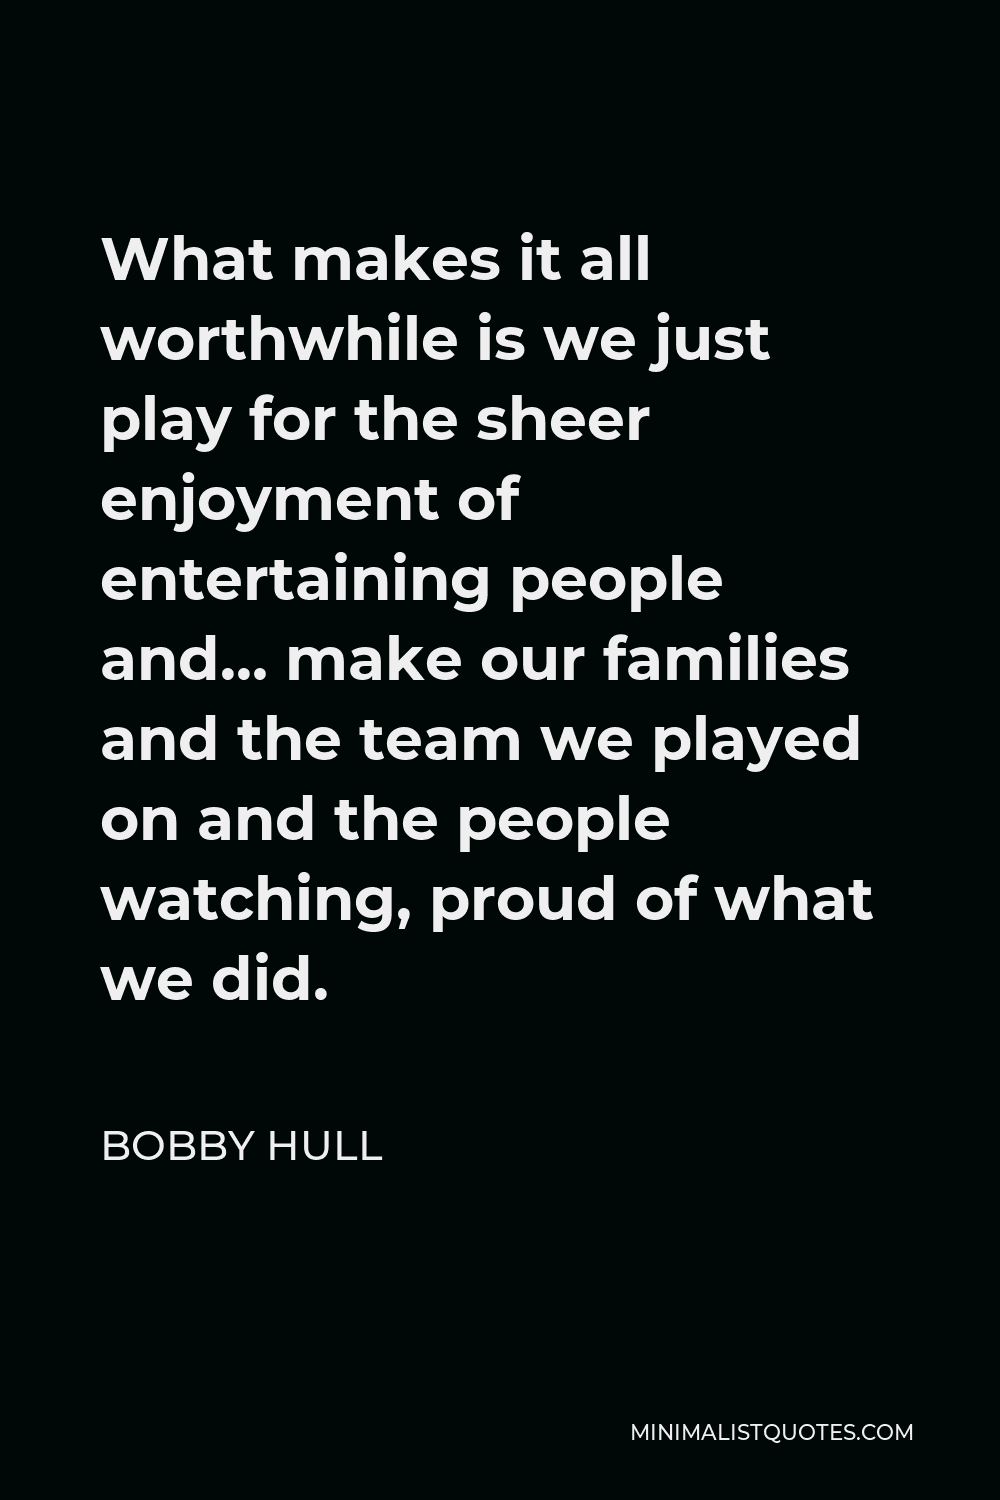 Bobby Hull Quote - What makes it all worthwhile is we just play for the sheer enjoyment of entertaining people and… make our families and the team we played on and the people watching, proud of what we did.